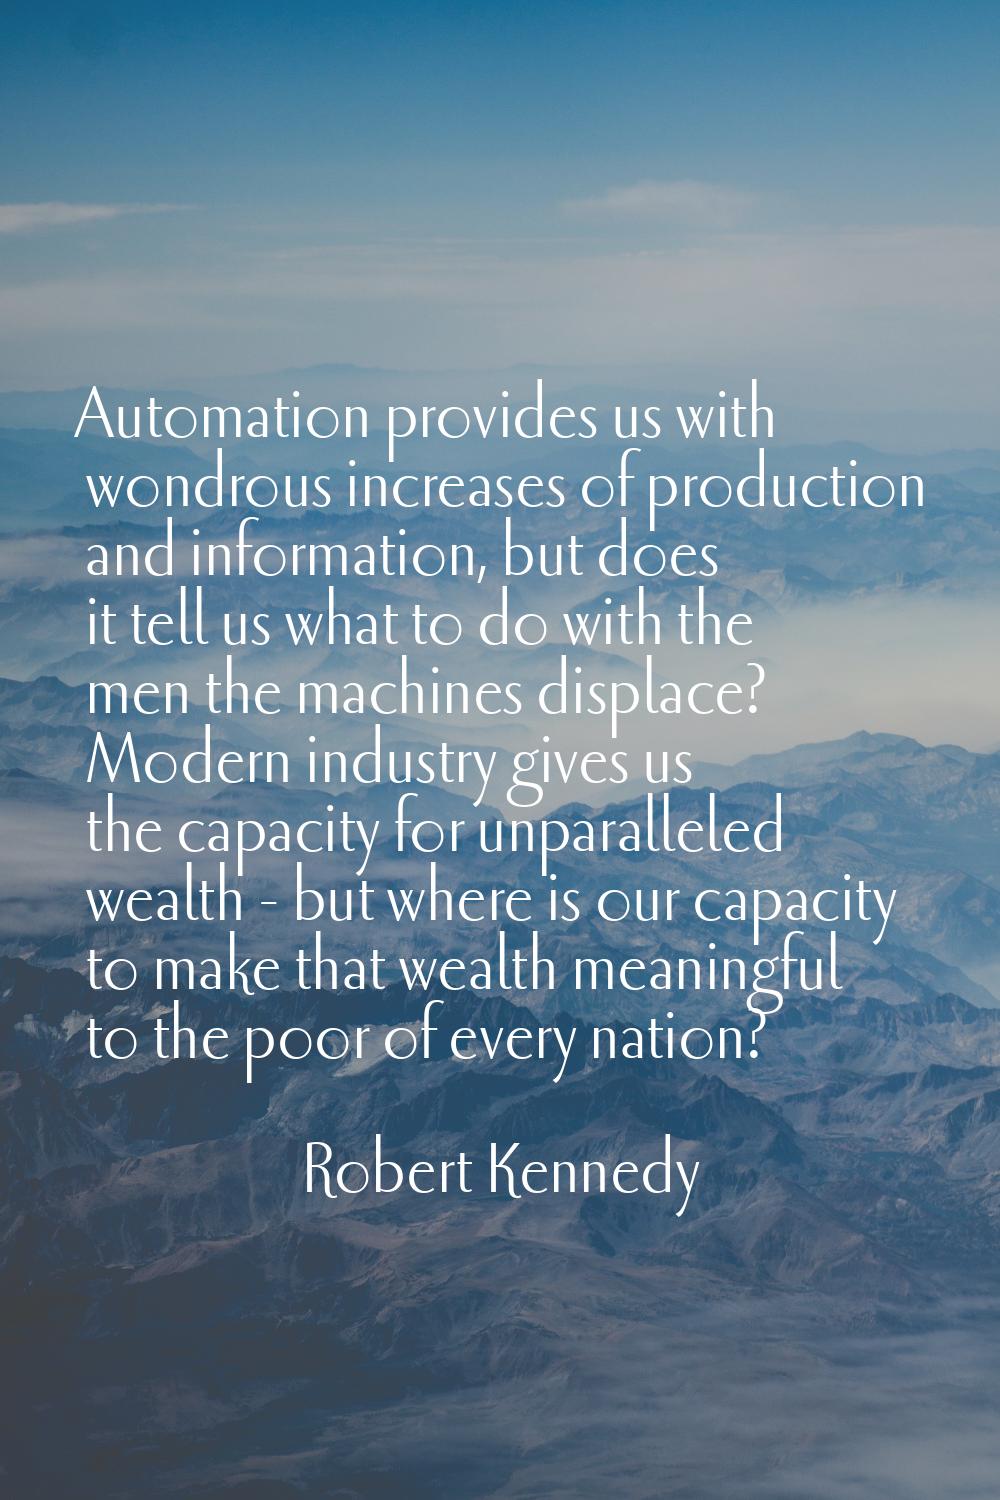 Automation provides us with wondrous increases of production and information, but does it tell us w